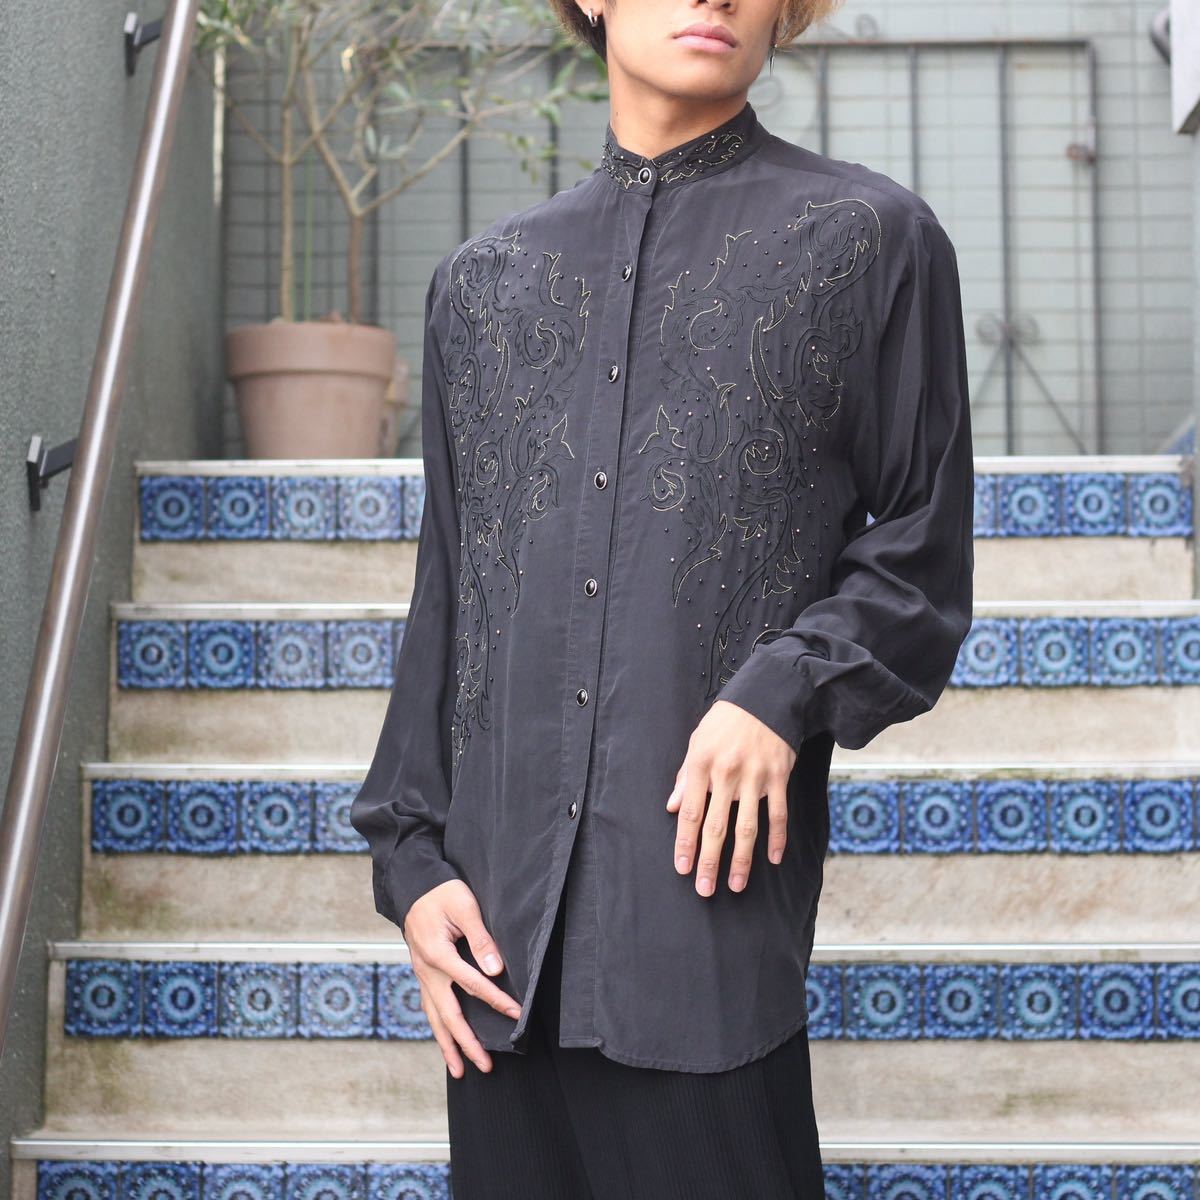 *SPECIAL ITEM* USA VINTAGE SILK100% EMBROIDERY BEADS OVER DESIGN SHIRT/アメリカ古着シルク100%刺繍ビーズオーバーデザインシャツ